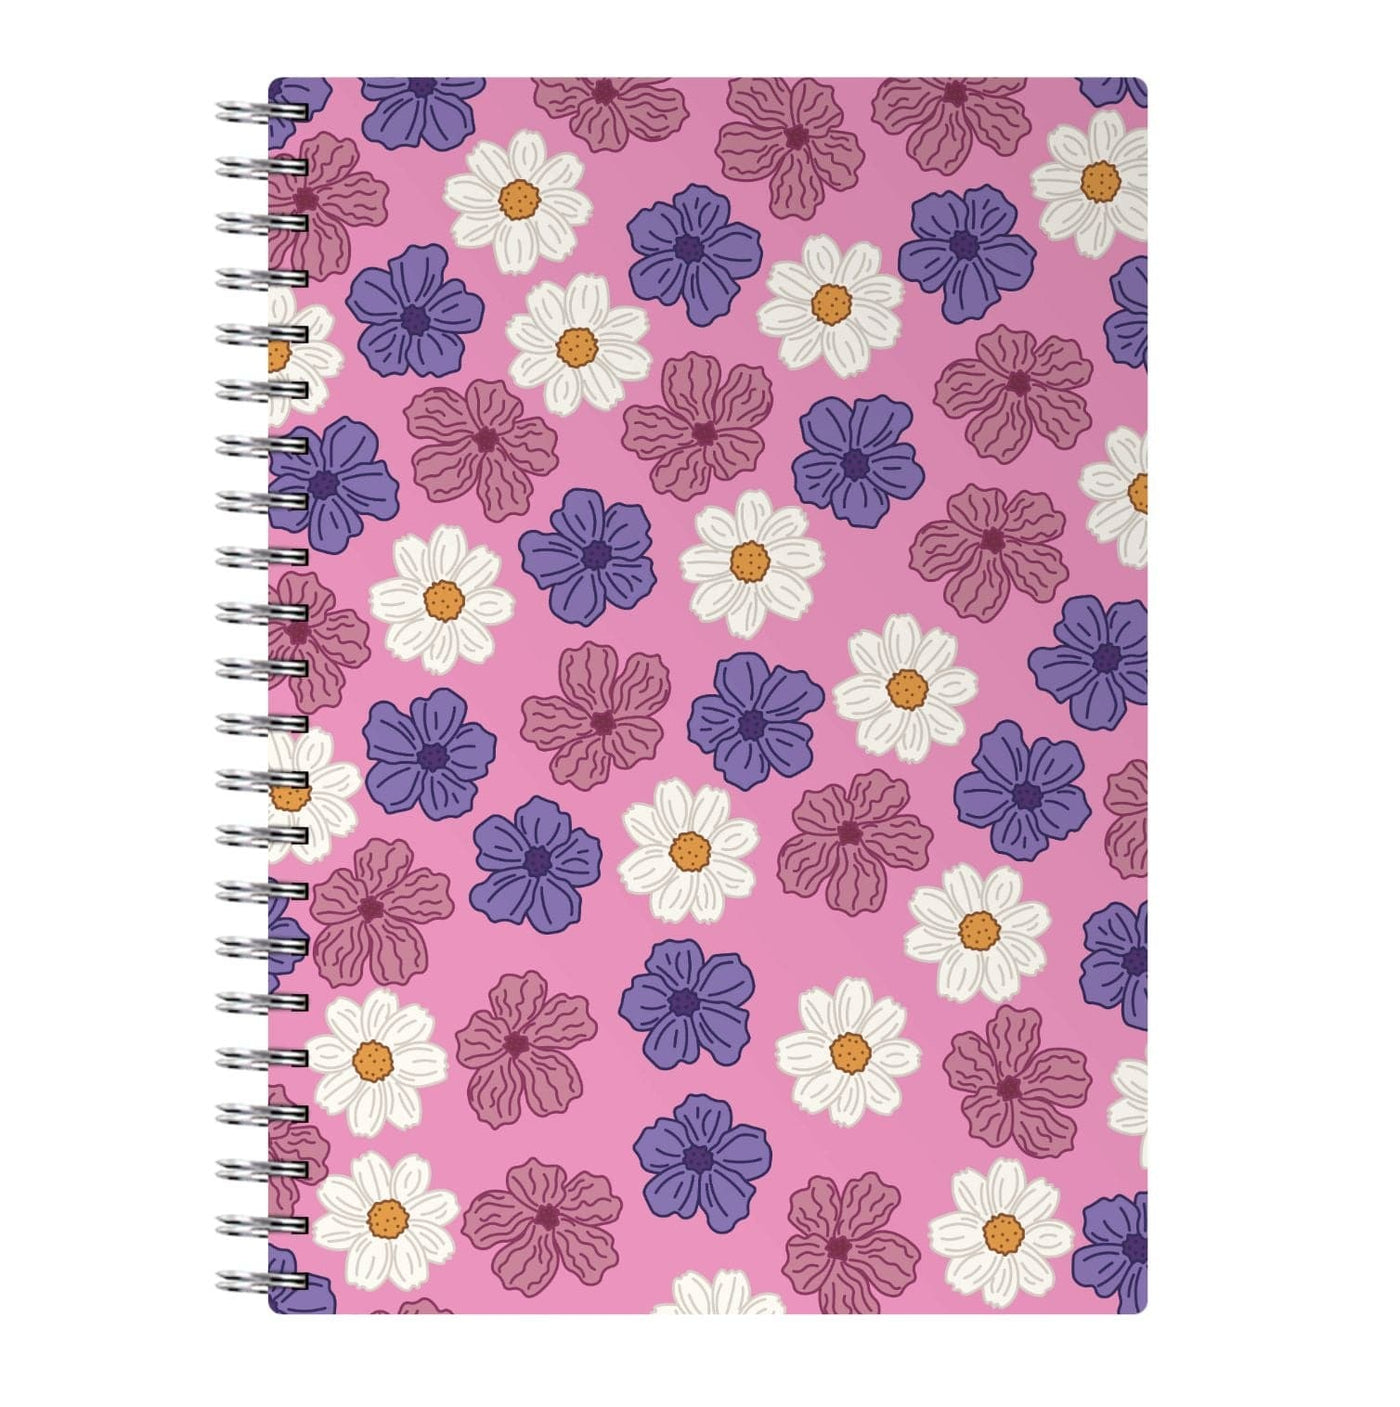 Pink, Purple And White Flowers - Floral Patterns Notebook